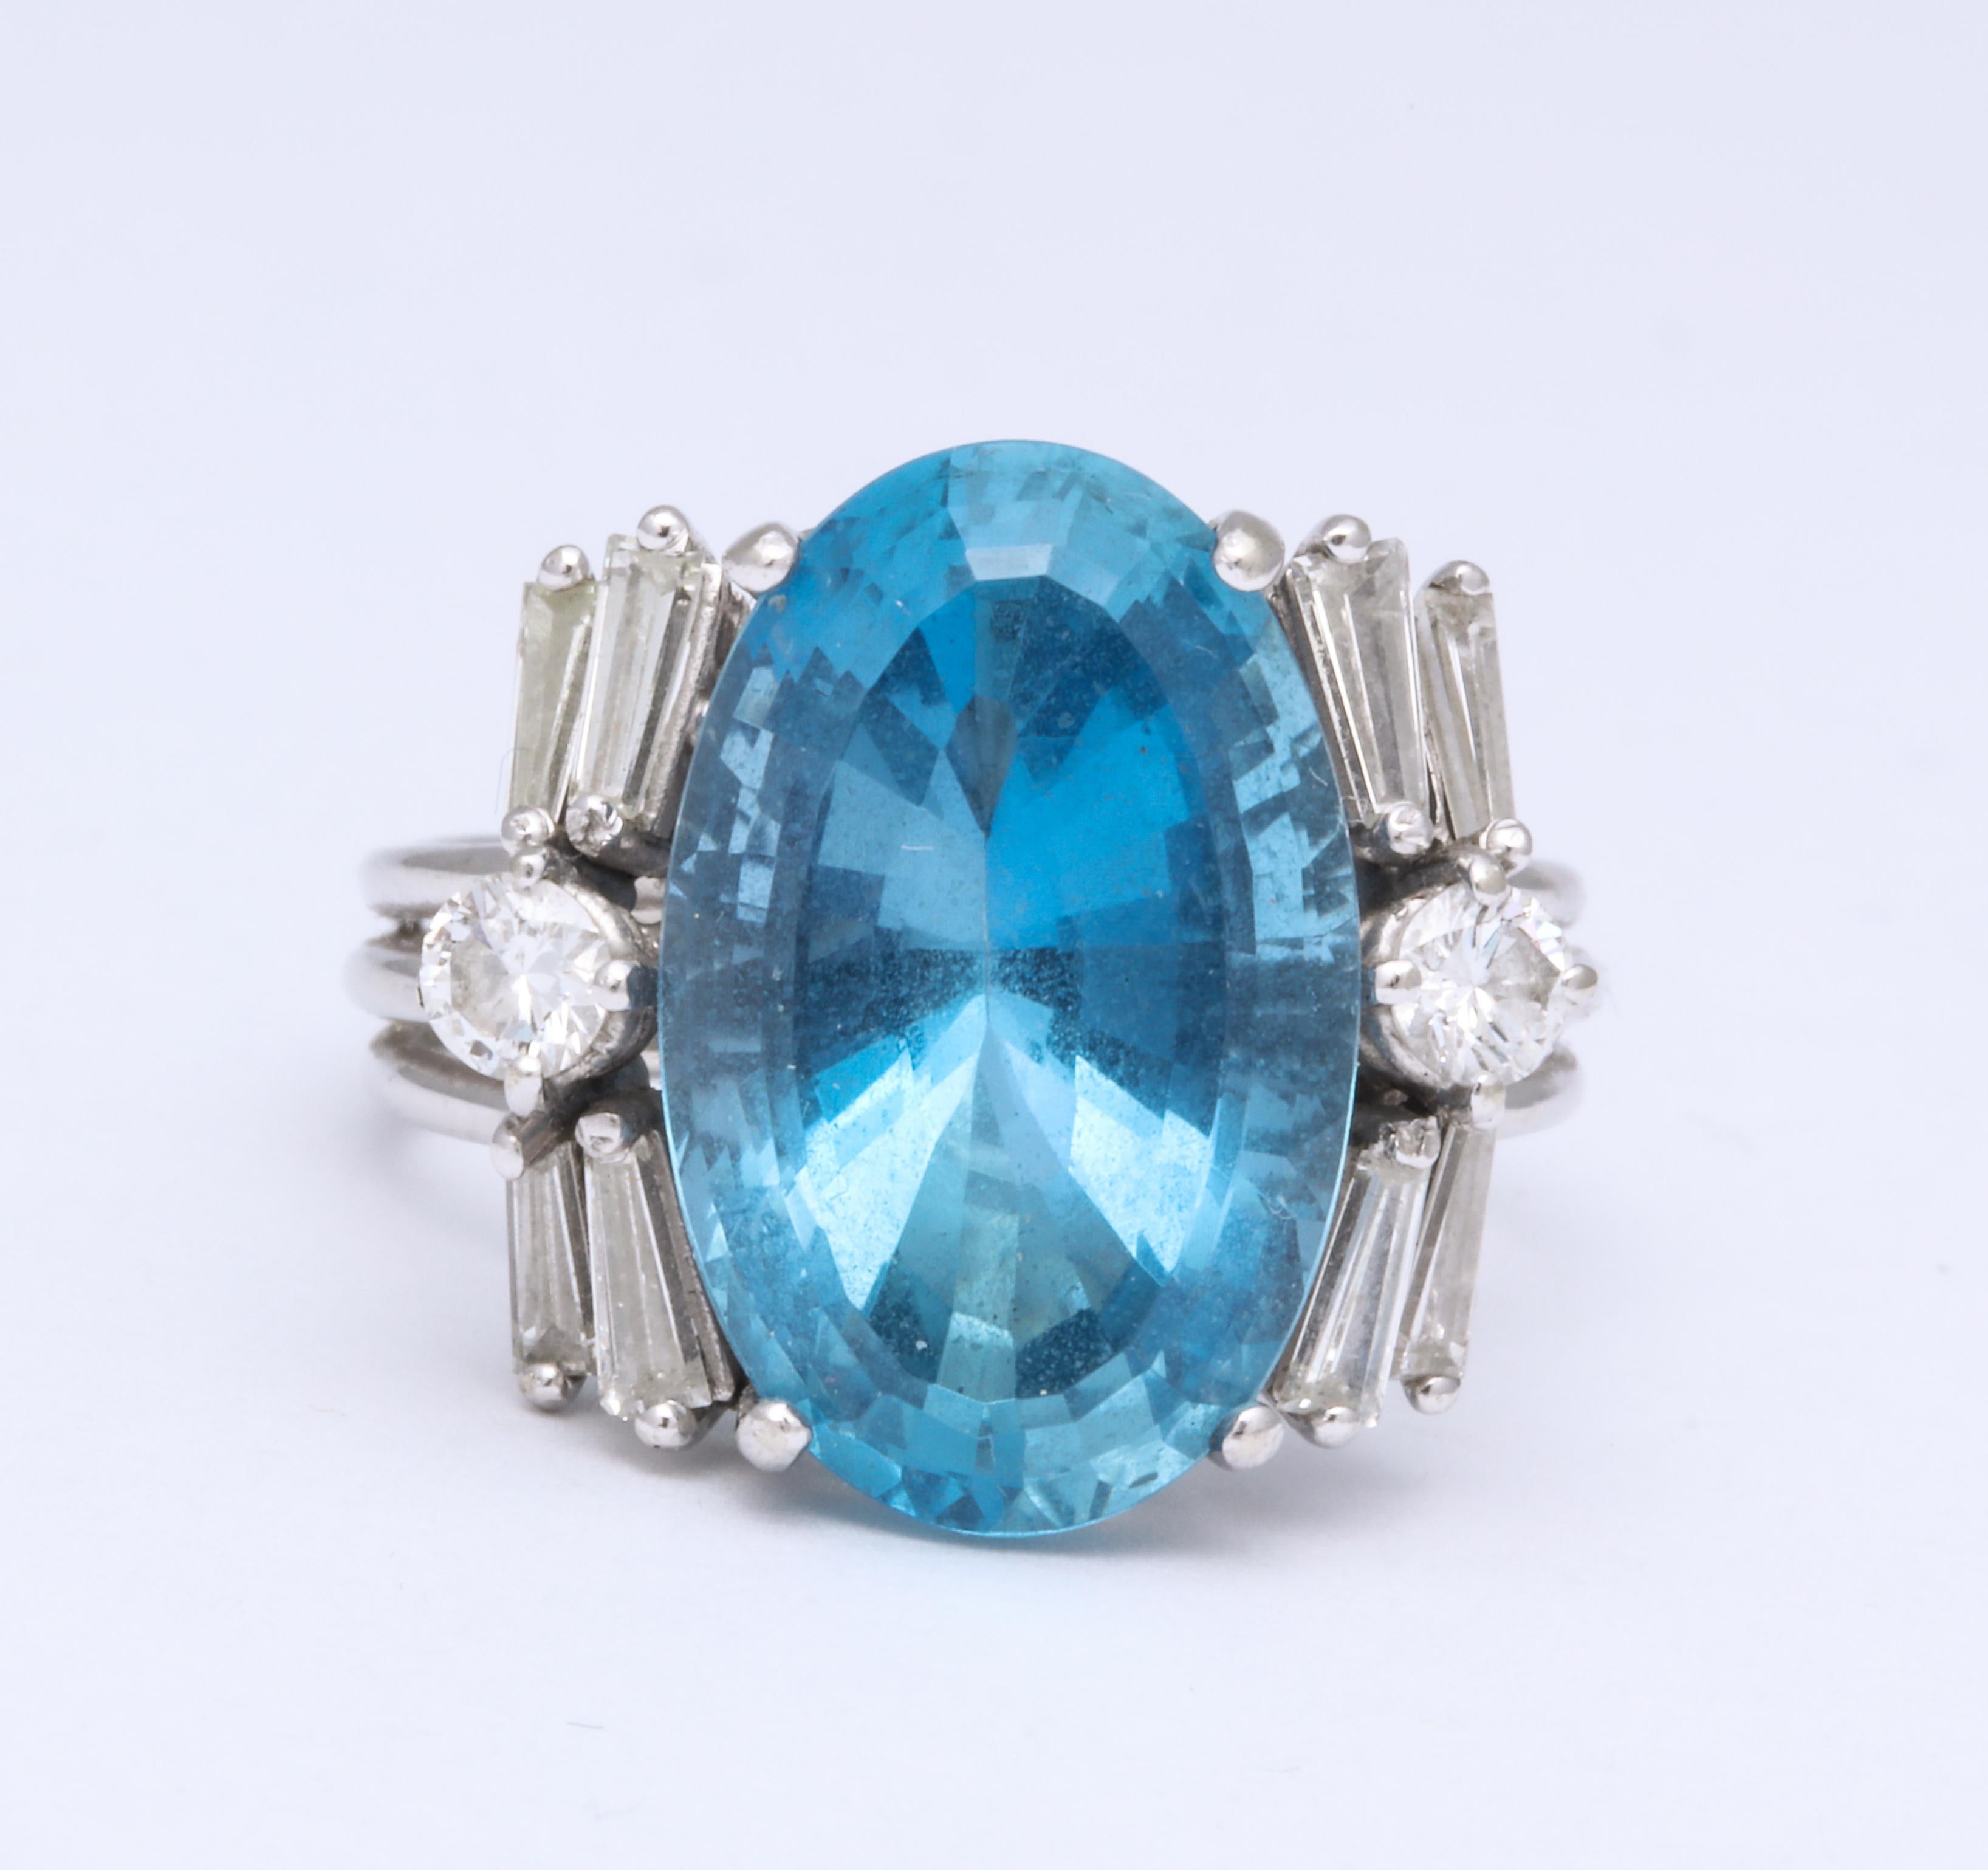 A stunning aquamarine ring from the greatest aqua mine of all time the Santa Maria (now closed) flanked by a combination of round and baguette diamonds in a floral setting. With certificate available.